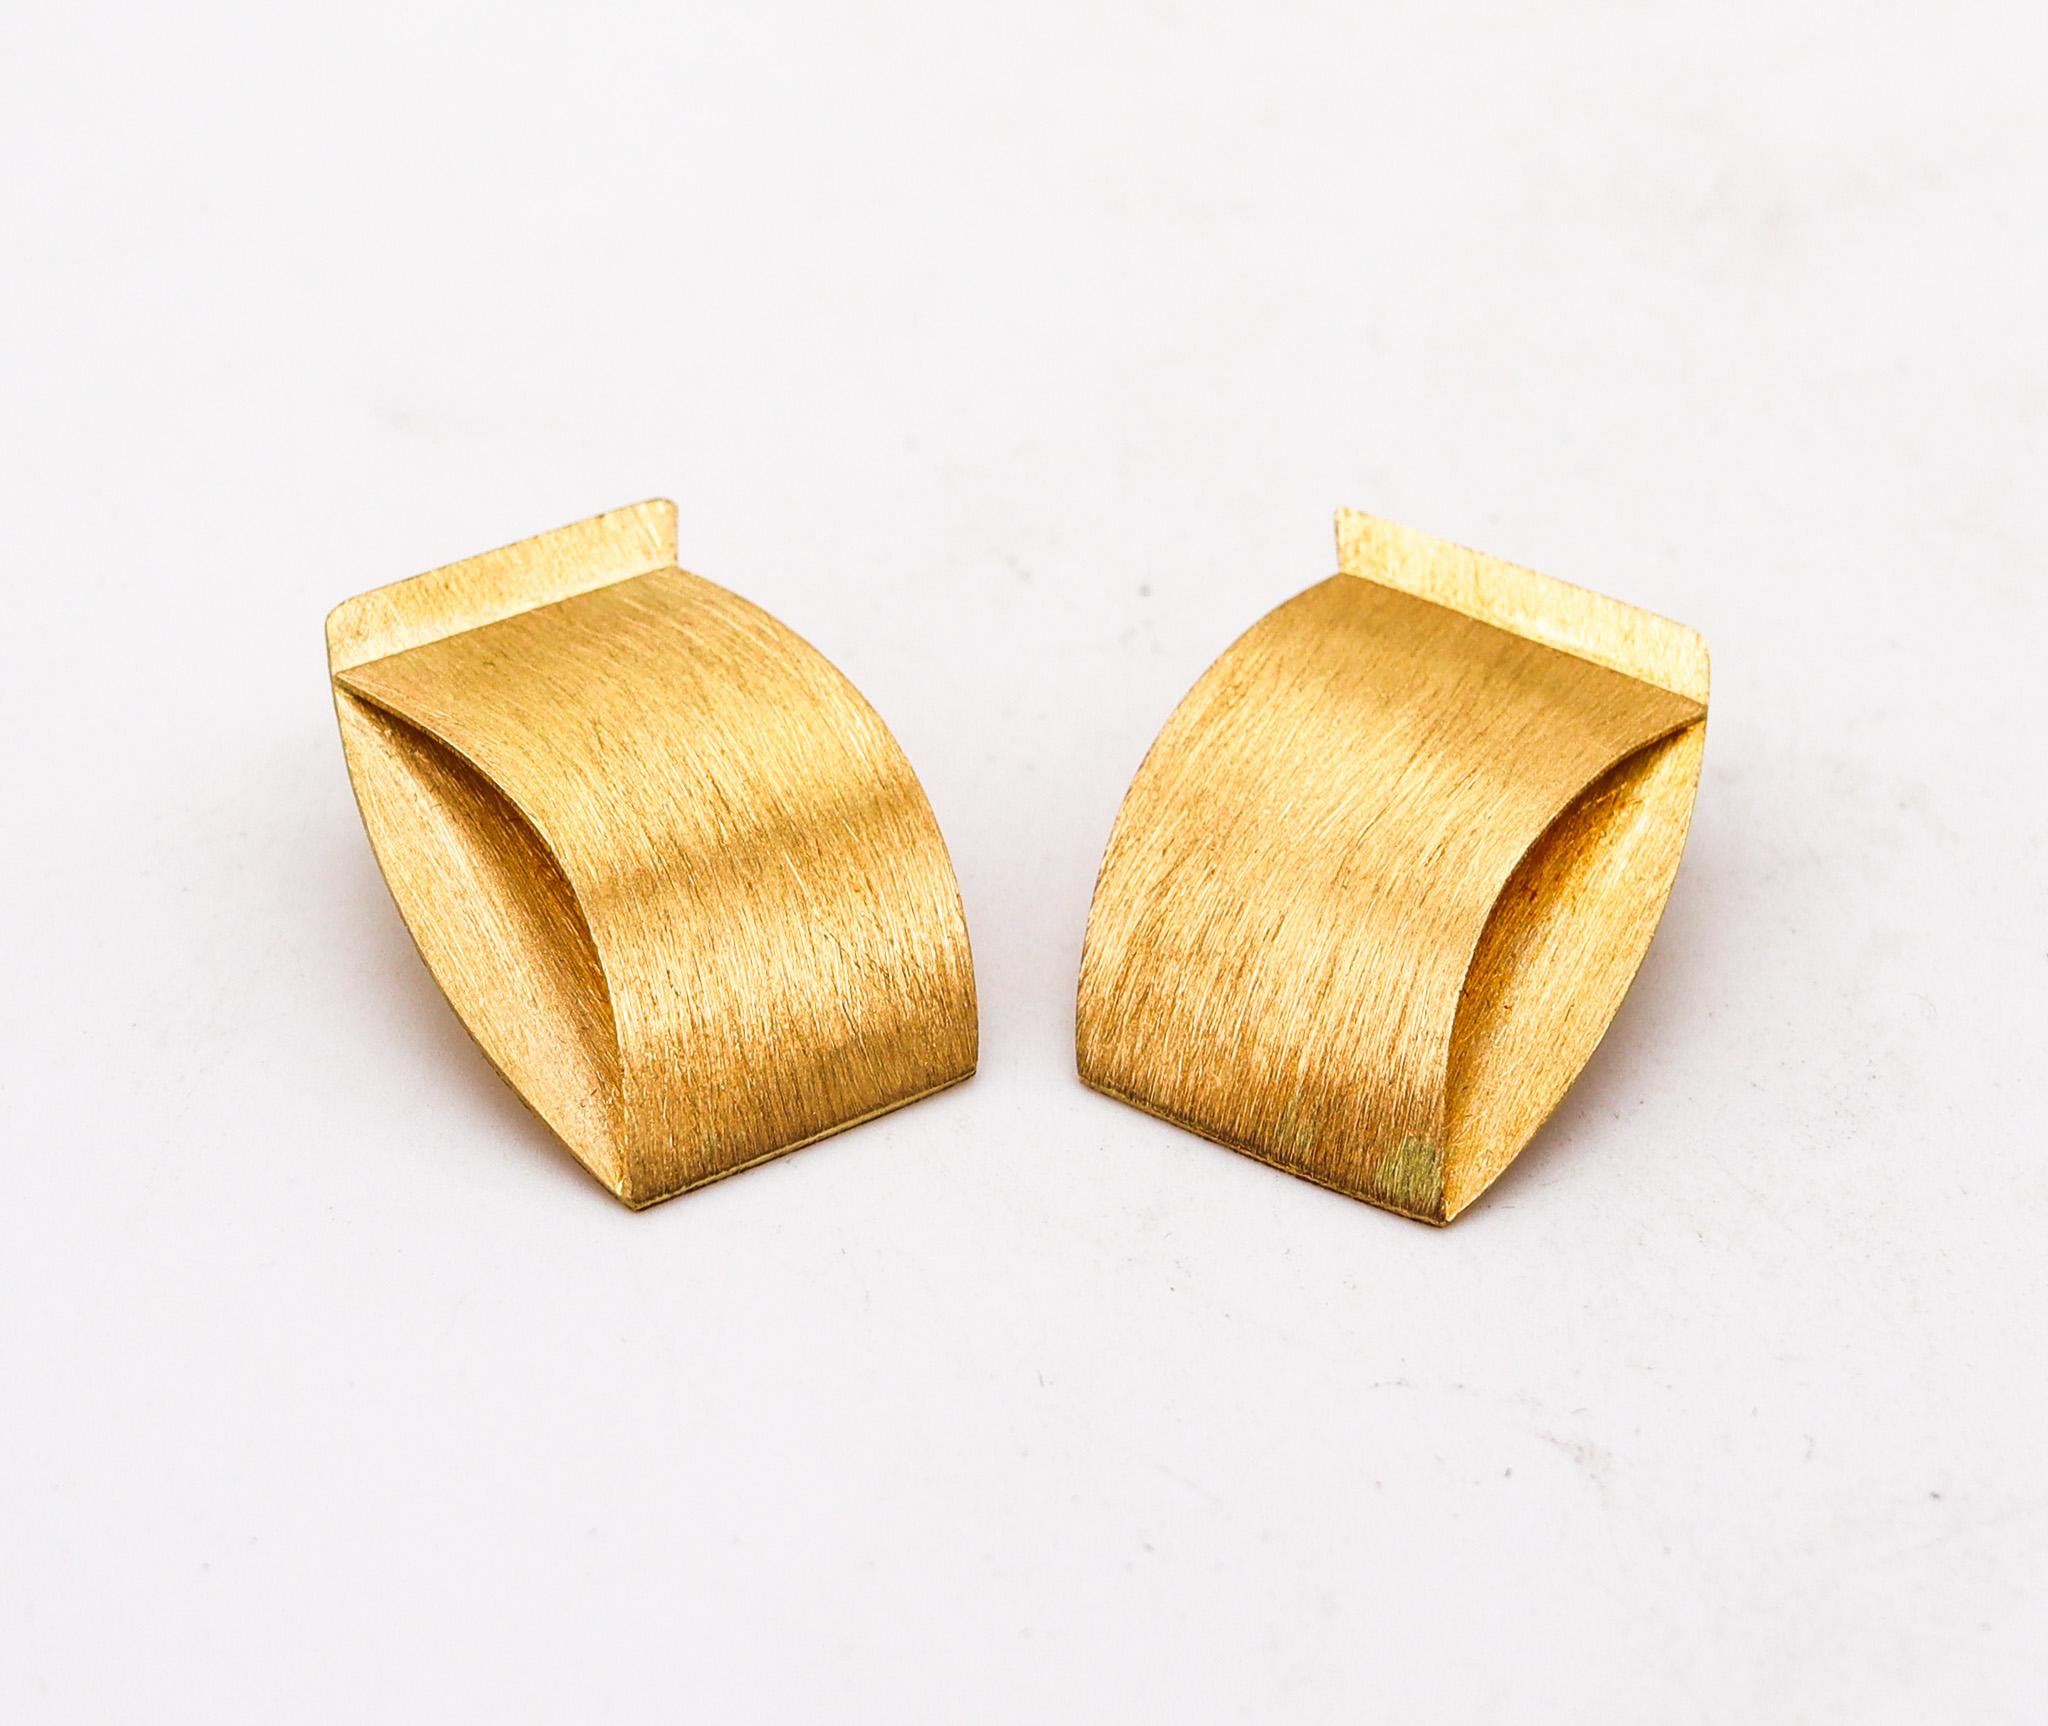 Geometric earrings designed by Giampaolo Babetto (1947-).

Beautiful geometric ear-clips made in three dimensions, created by the Italian artist and goldsmith Giampaolo Babetto, back in the 1984. These sculptural earrings has been designed in the